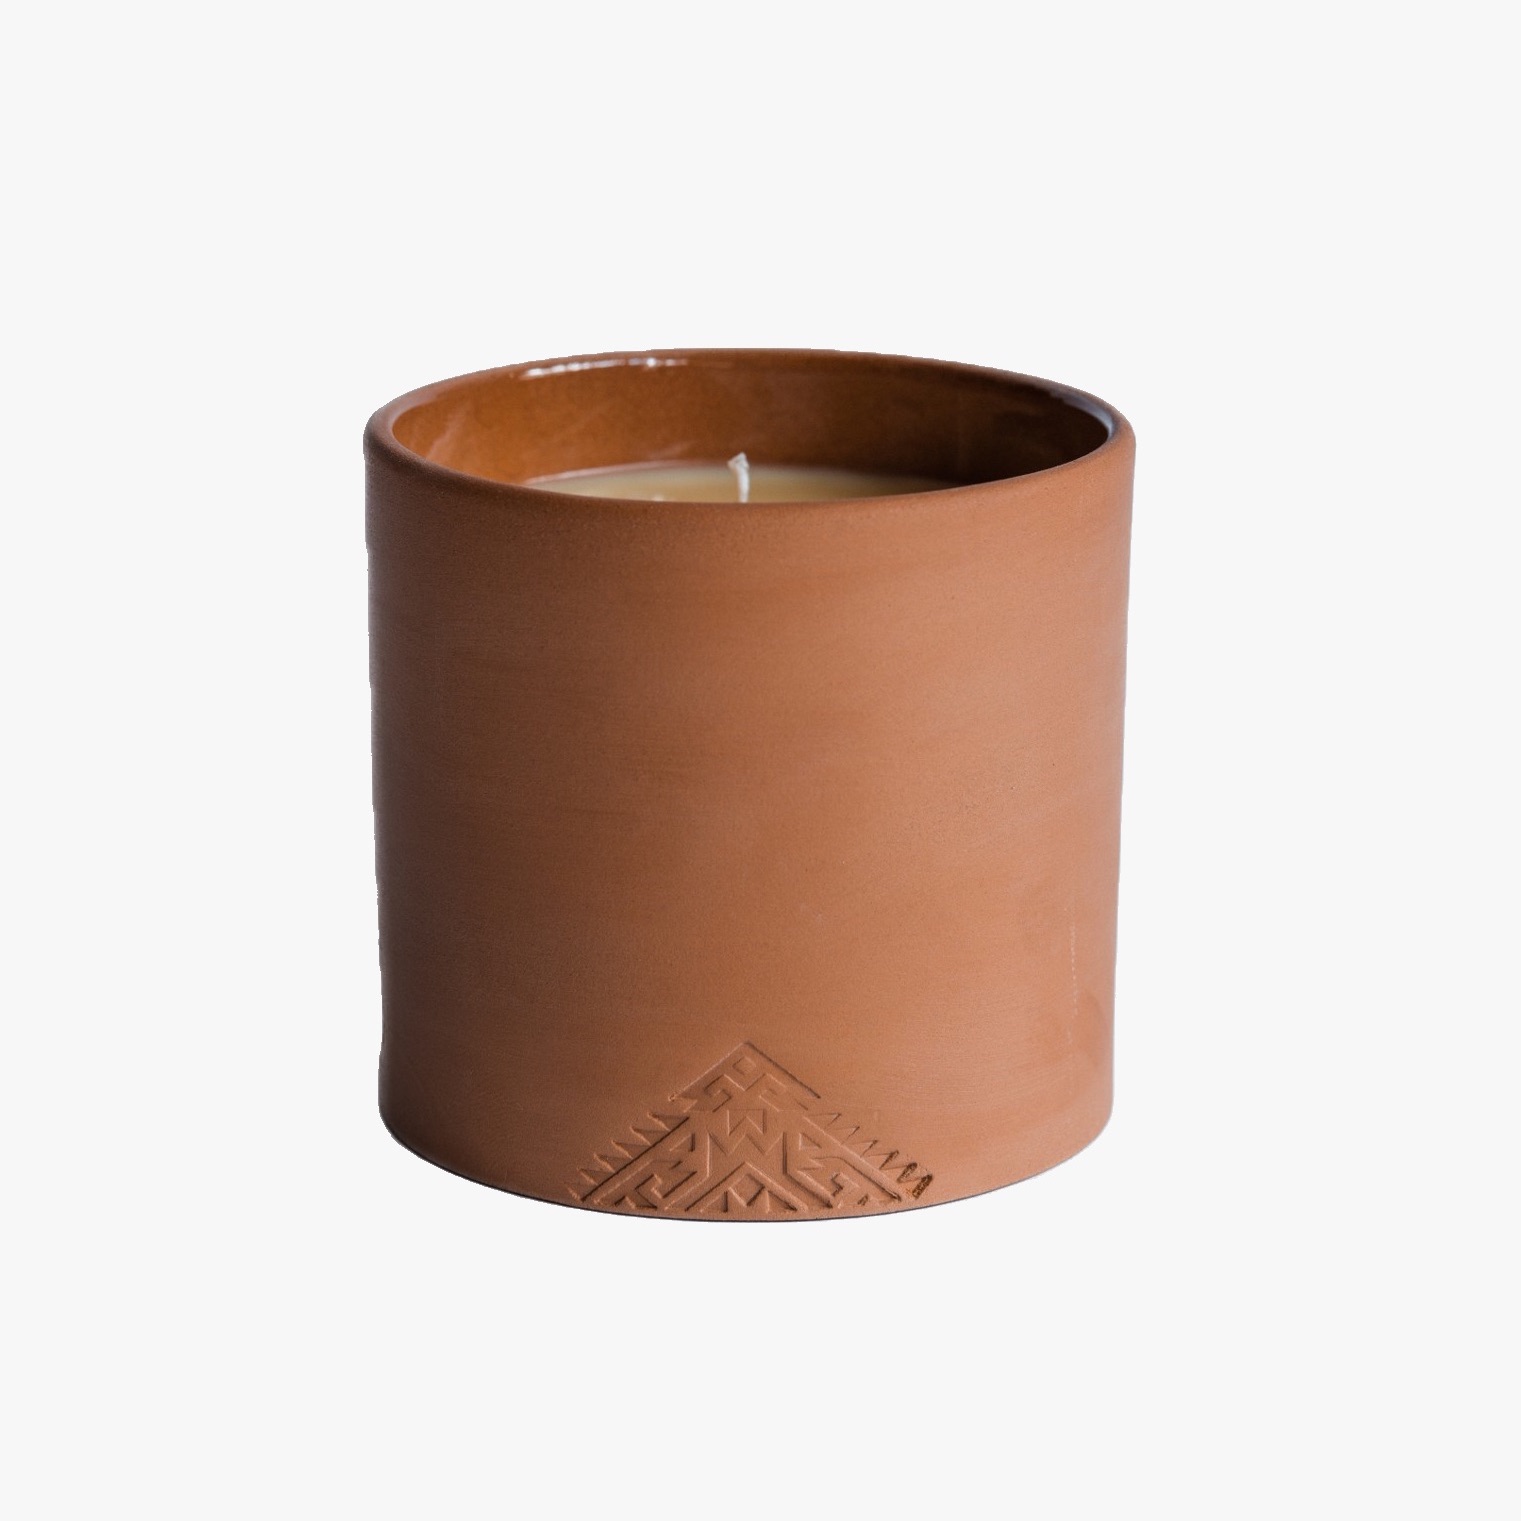 The Very Good Candle Company Indio Terracotta Candle